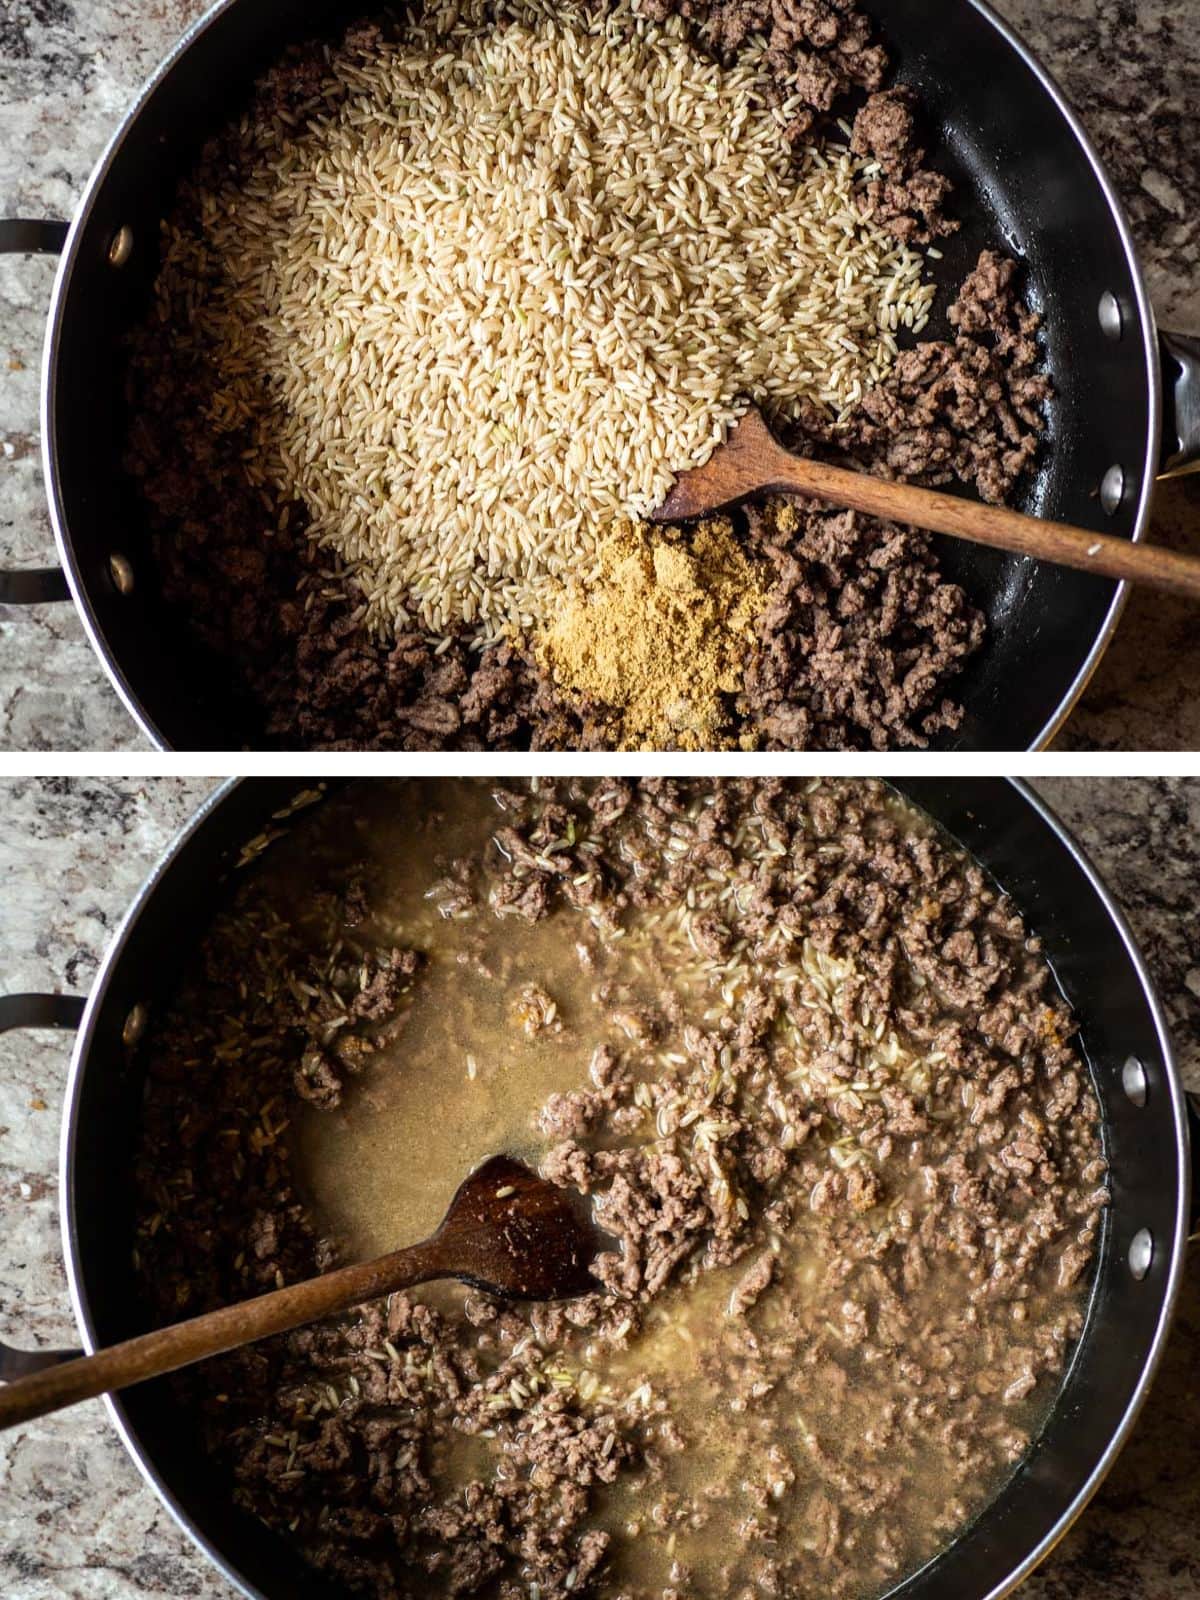 Rice and seasonings added to the skillet with the ground beef.